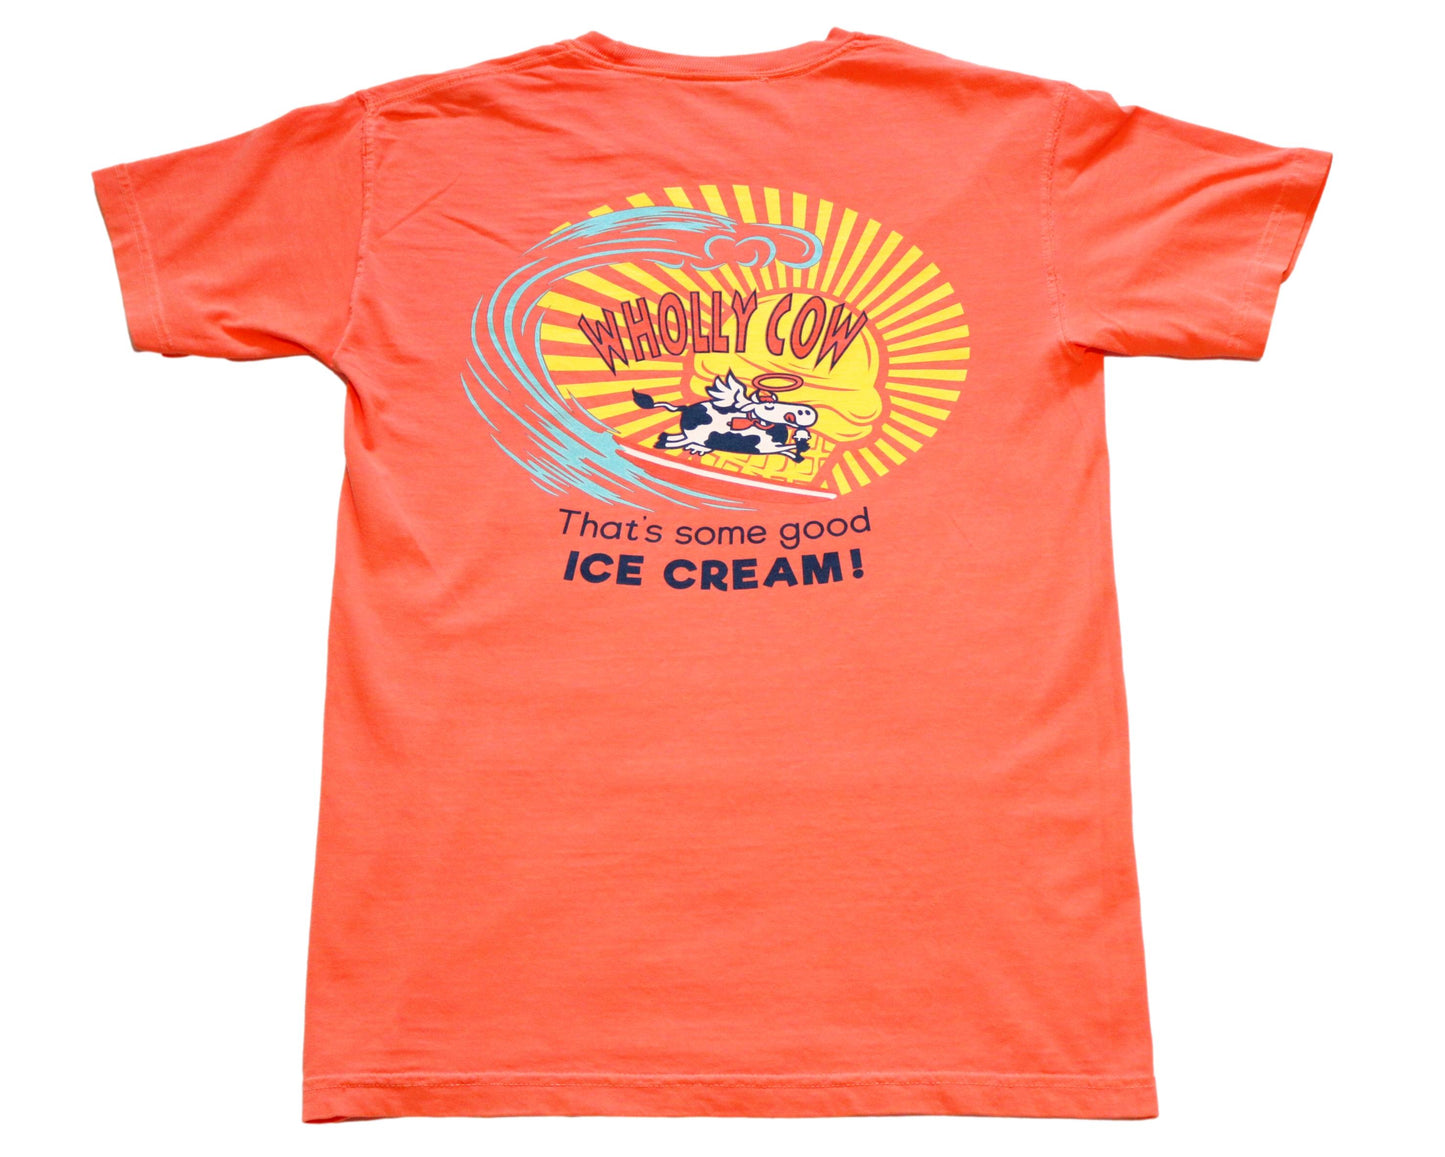 Wholly Cow local ice cream beach surfs Up t-shirt coral color